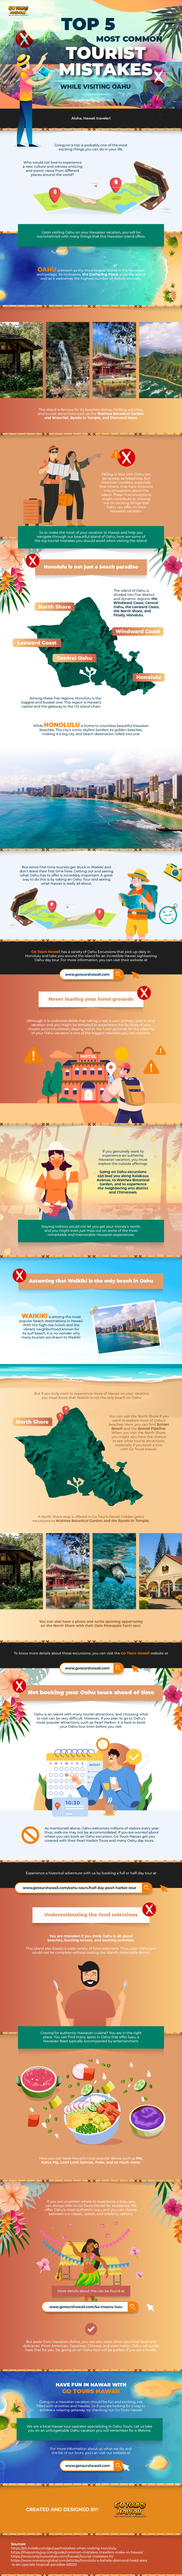 Top-5-Tourist-Mistakes-You-Should-Avoid-When-Visiting-Oahu-infographic-image-NJF